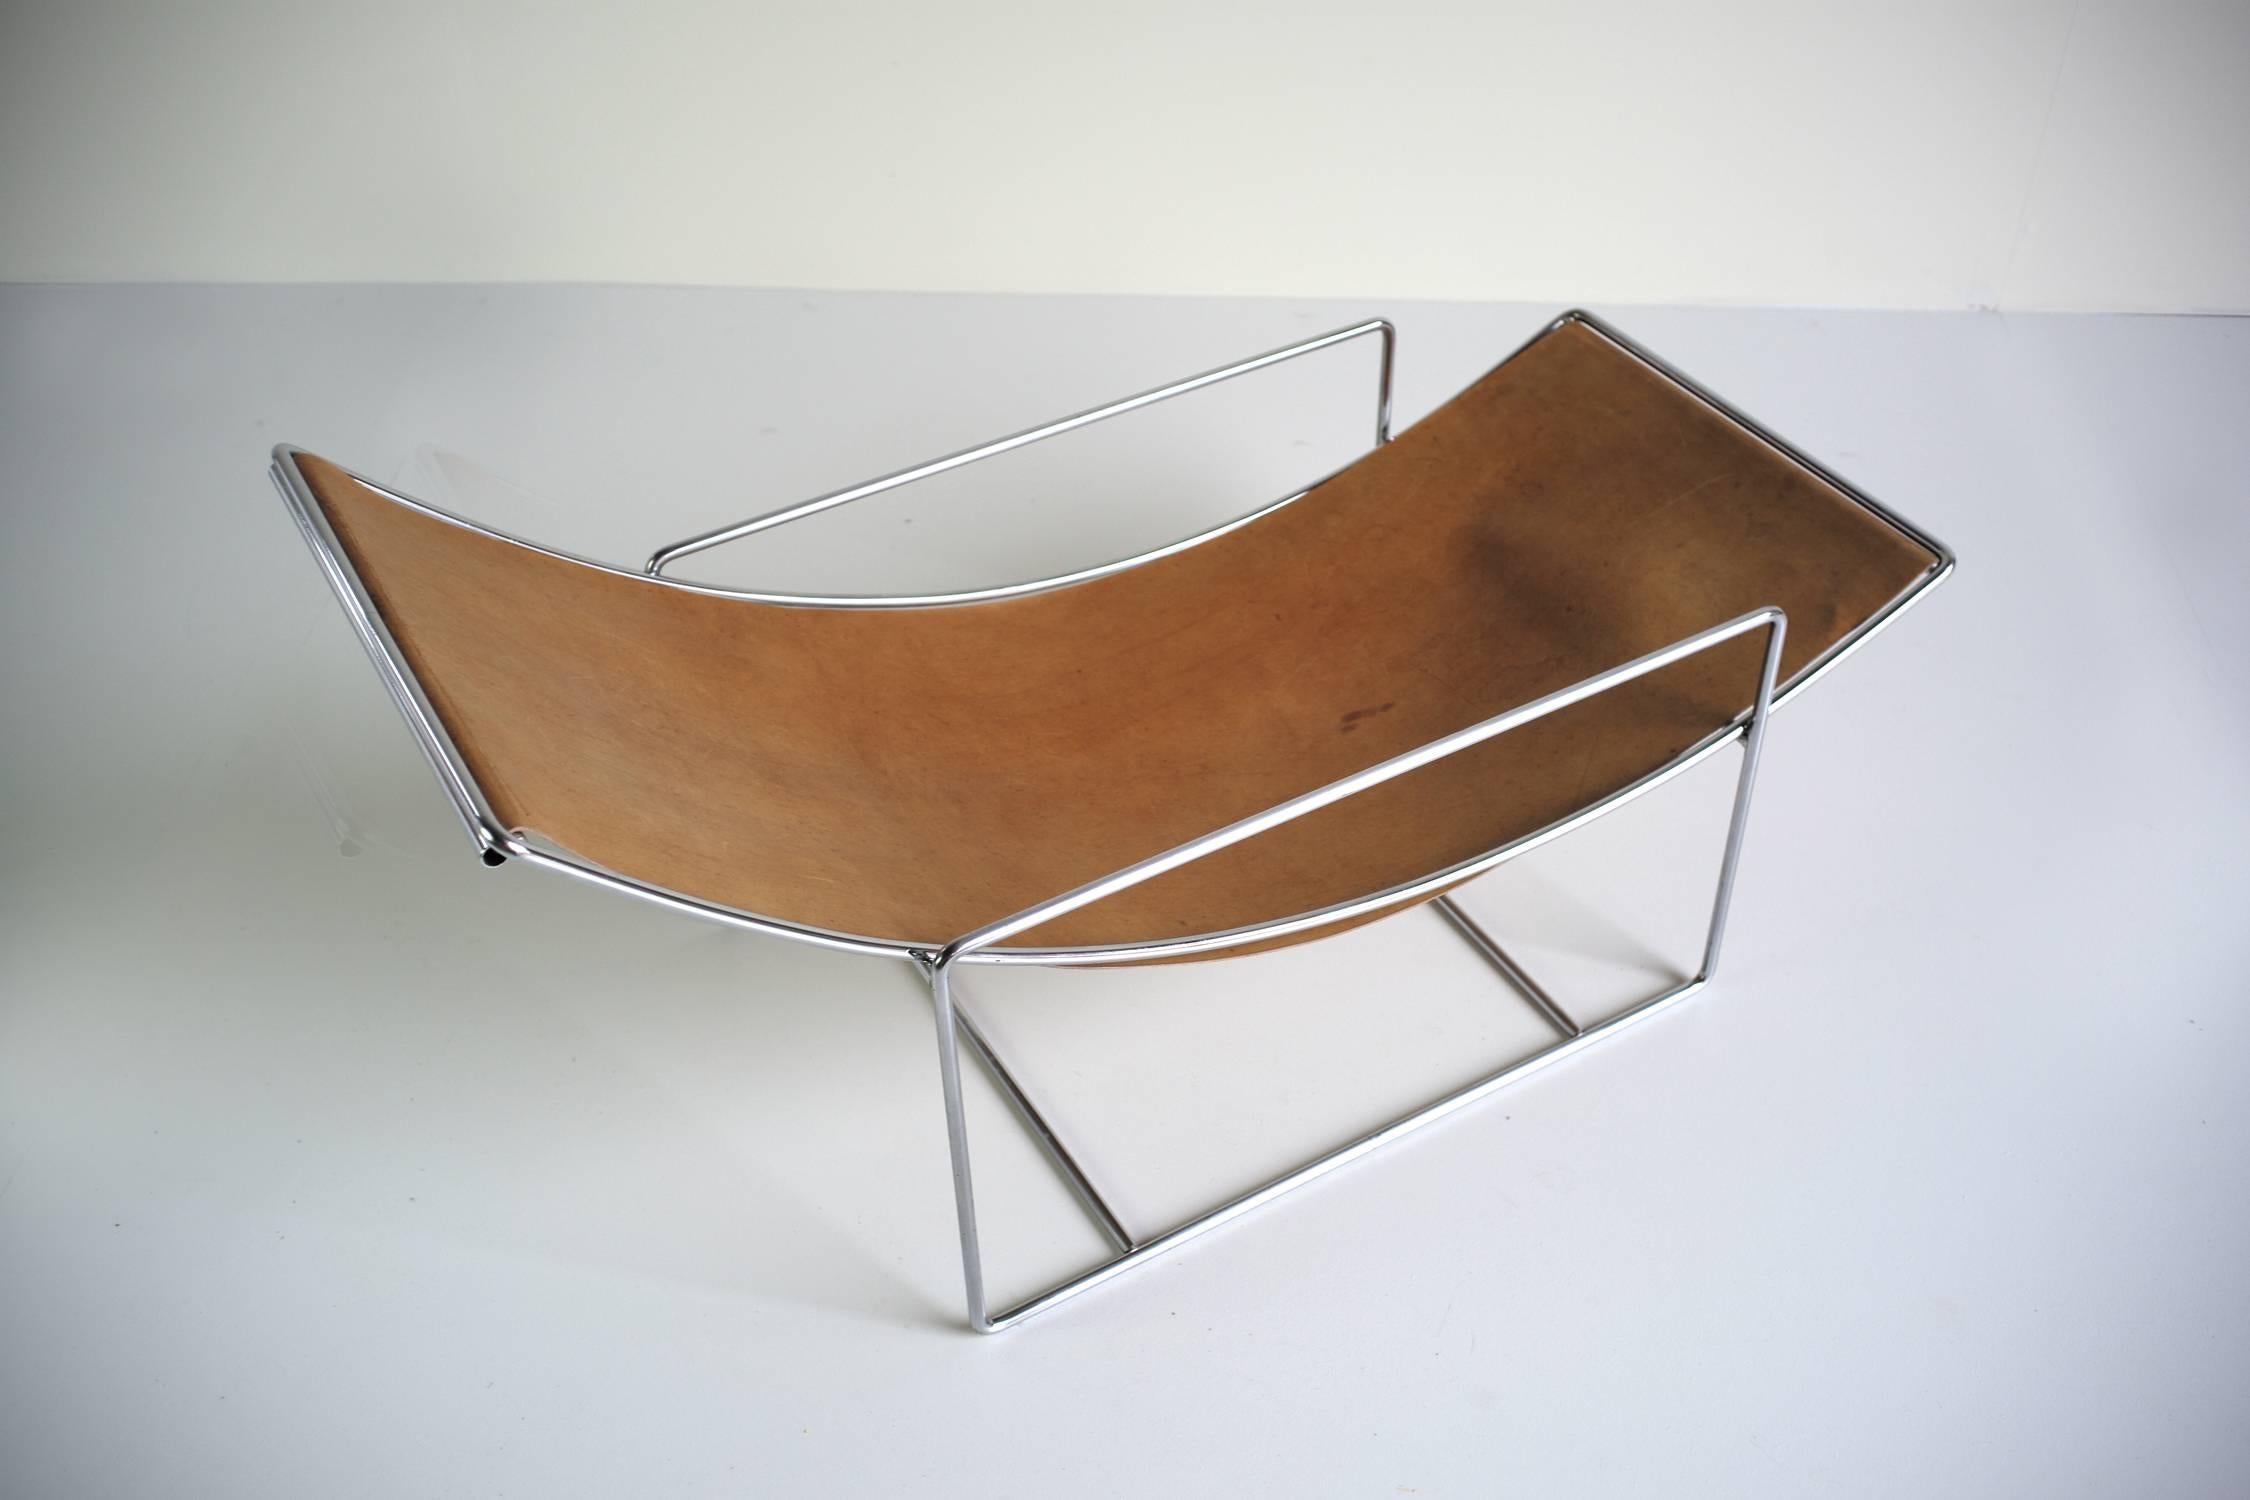 20th Century Minimalist Lounge Chair, Fawn Leather and Chrome, 1970